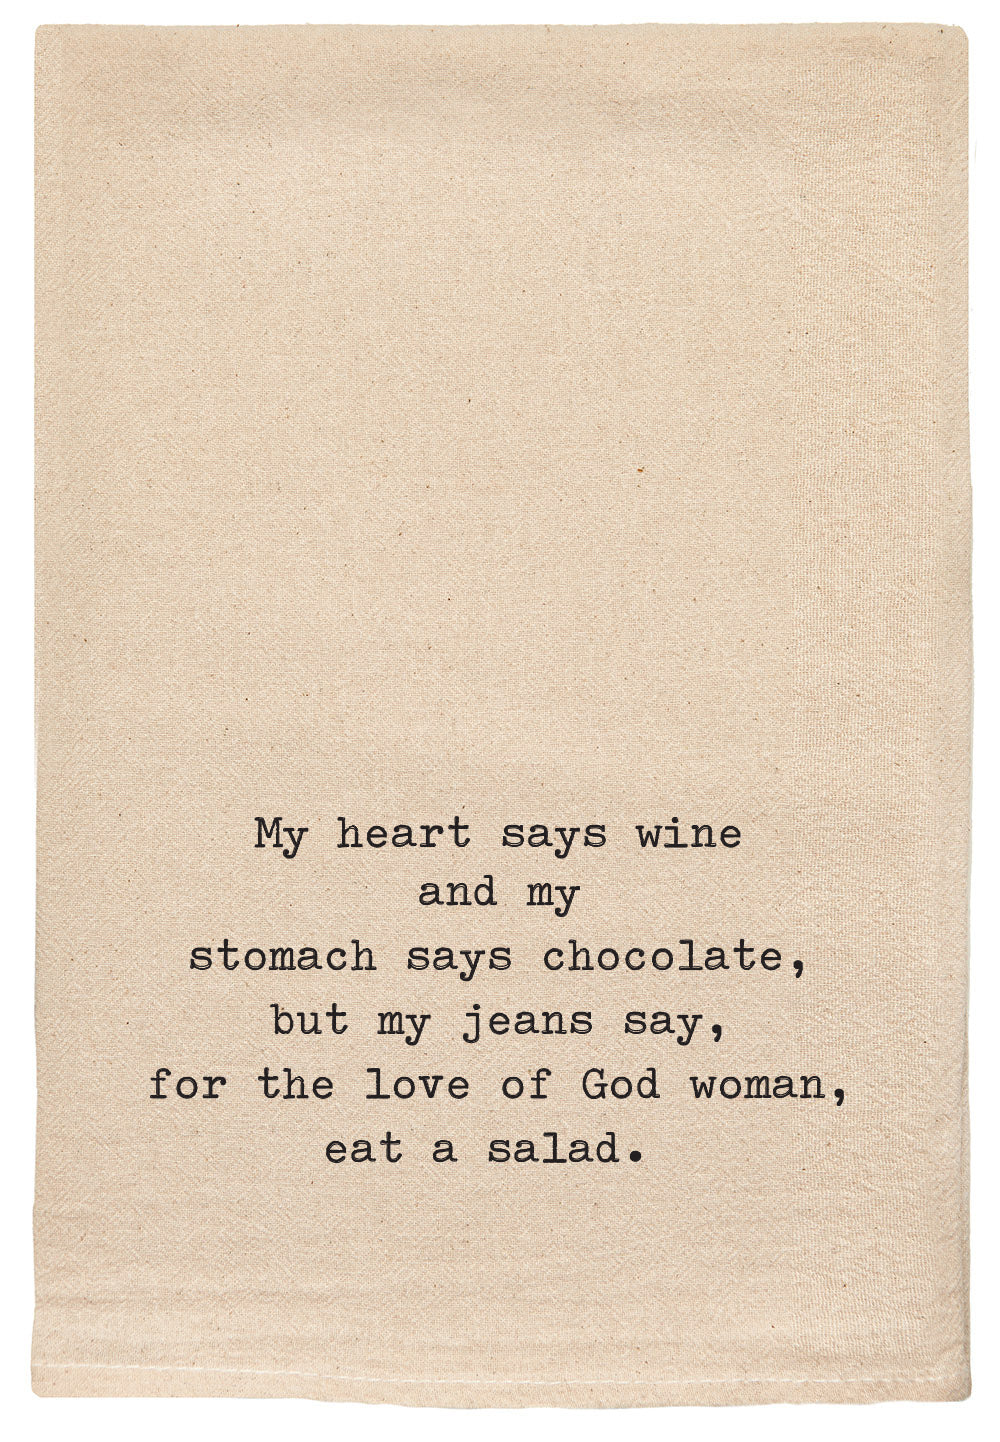 My heart says wine and my stomach says chocolate, but my jeans say, for the love of God woman, eat a salad